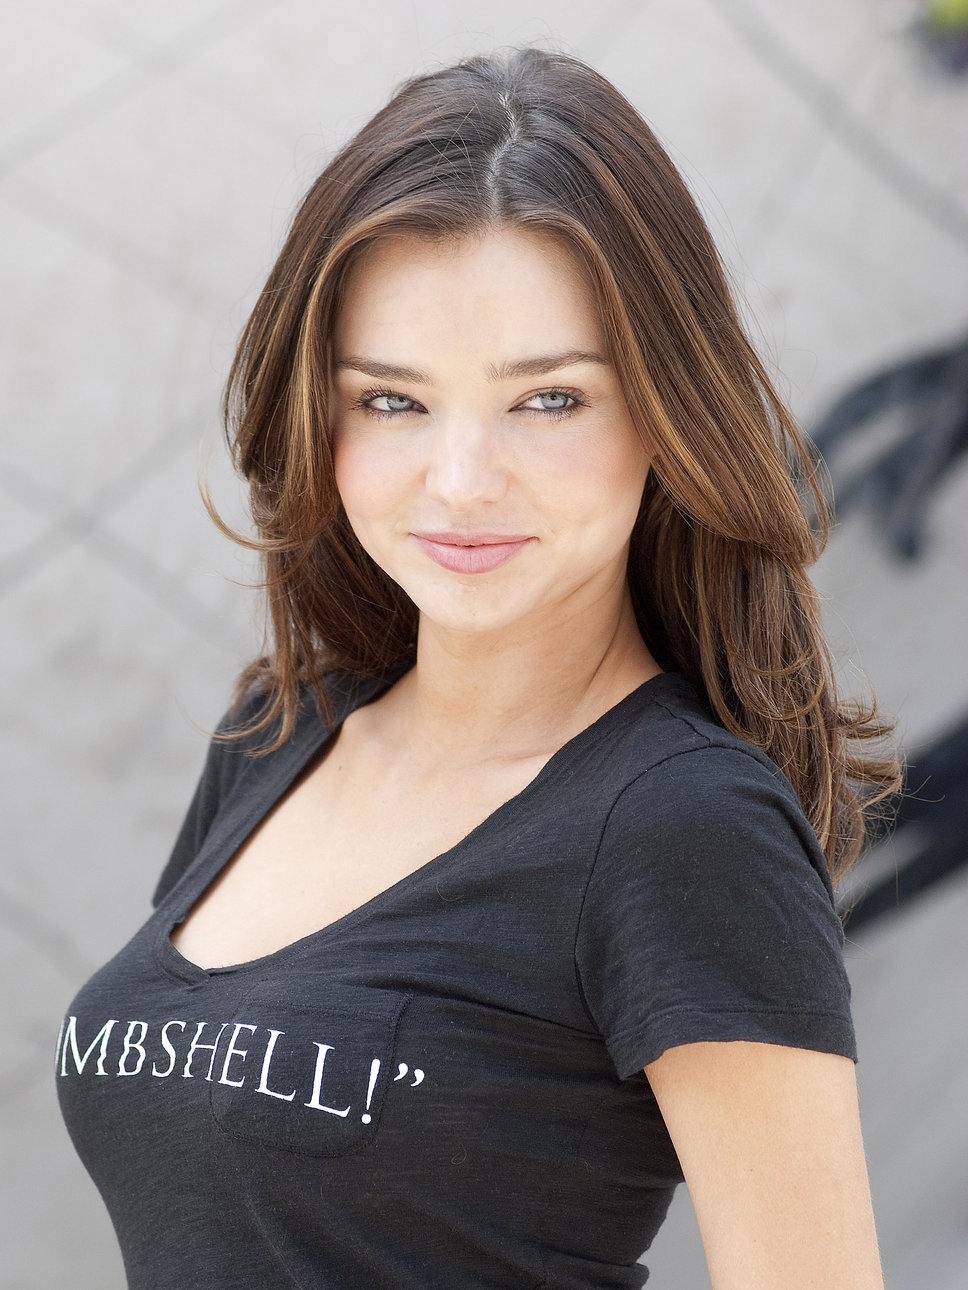 Masemons Miranda Kerr Pictures/Images and Photos